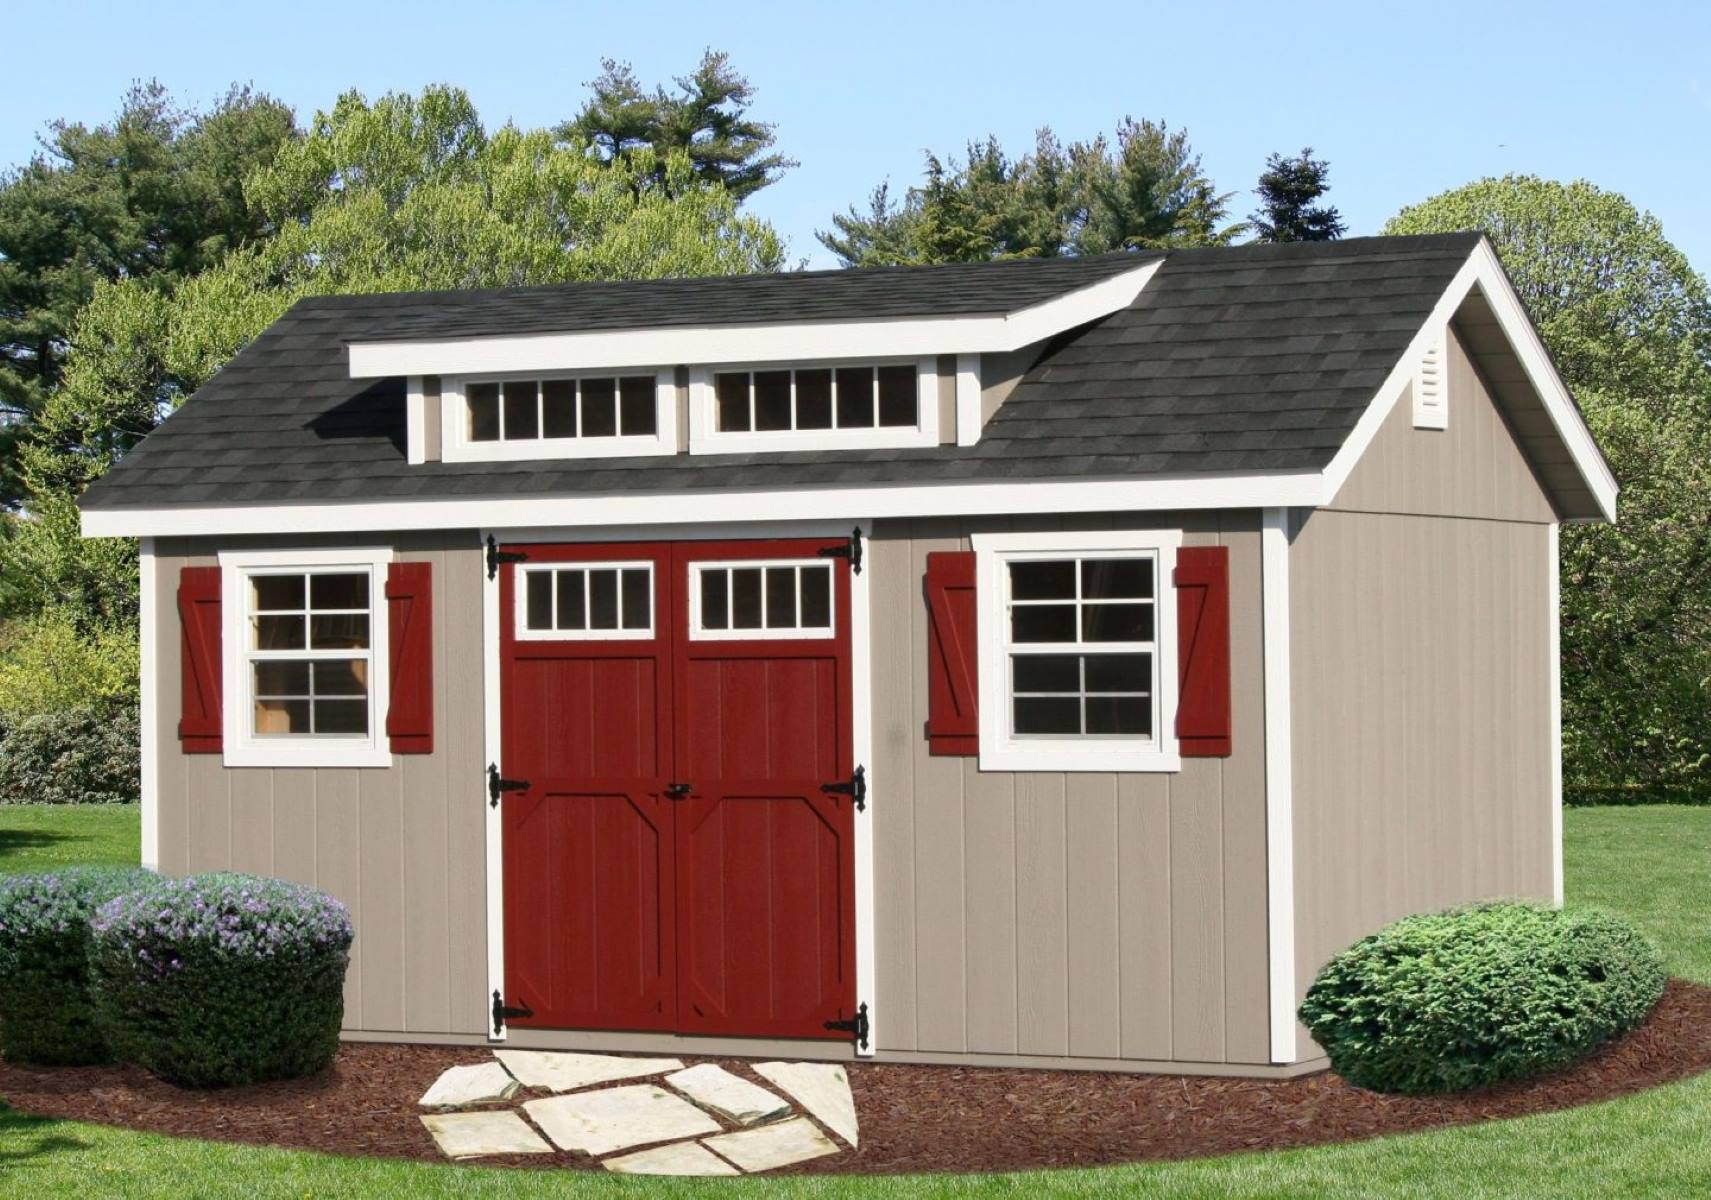 How To Build A Shed Dormer